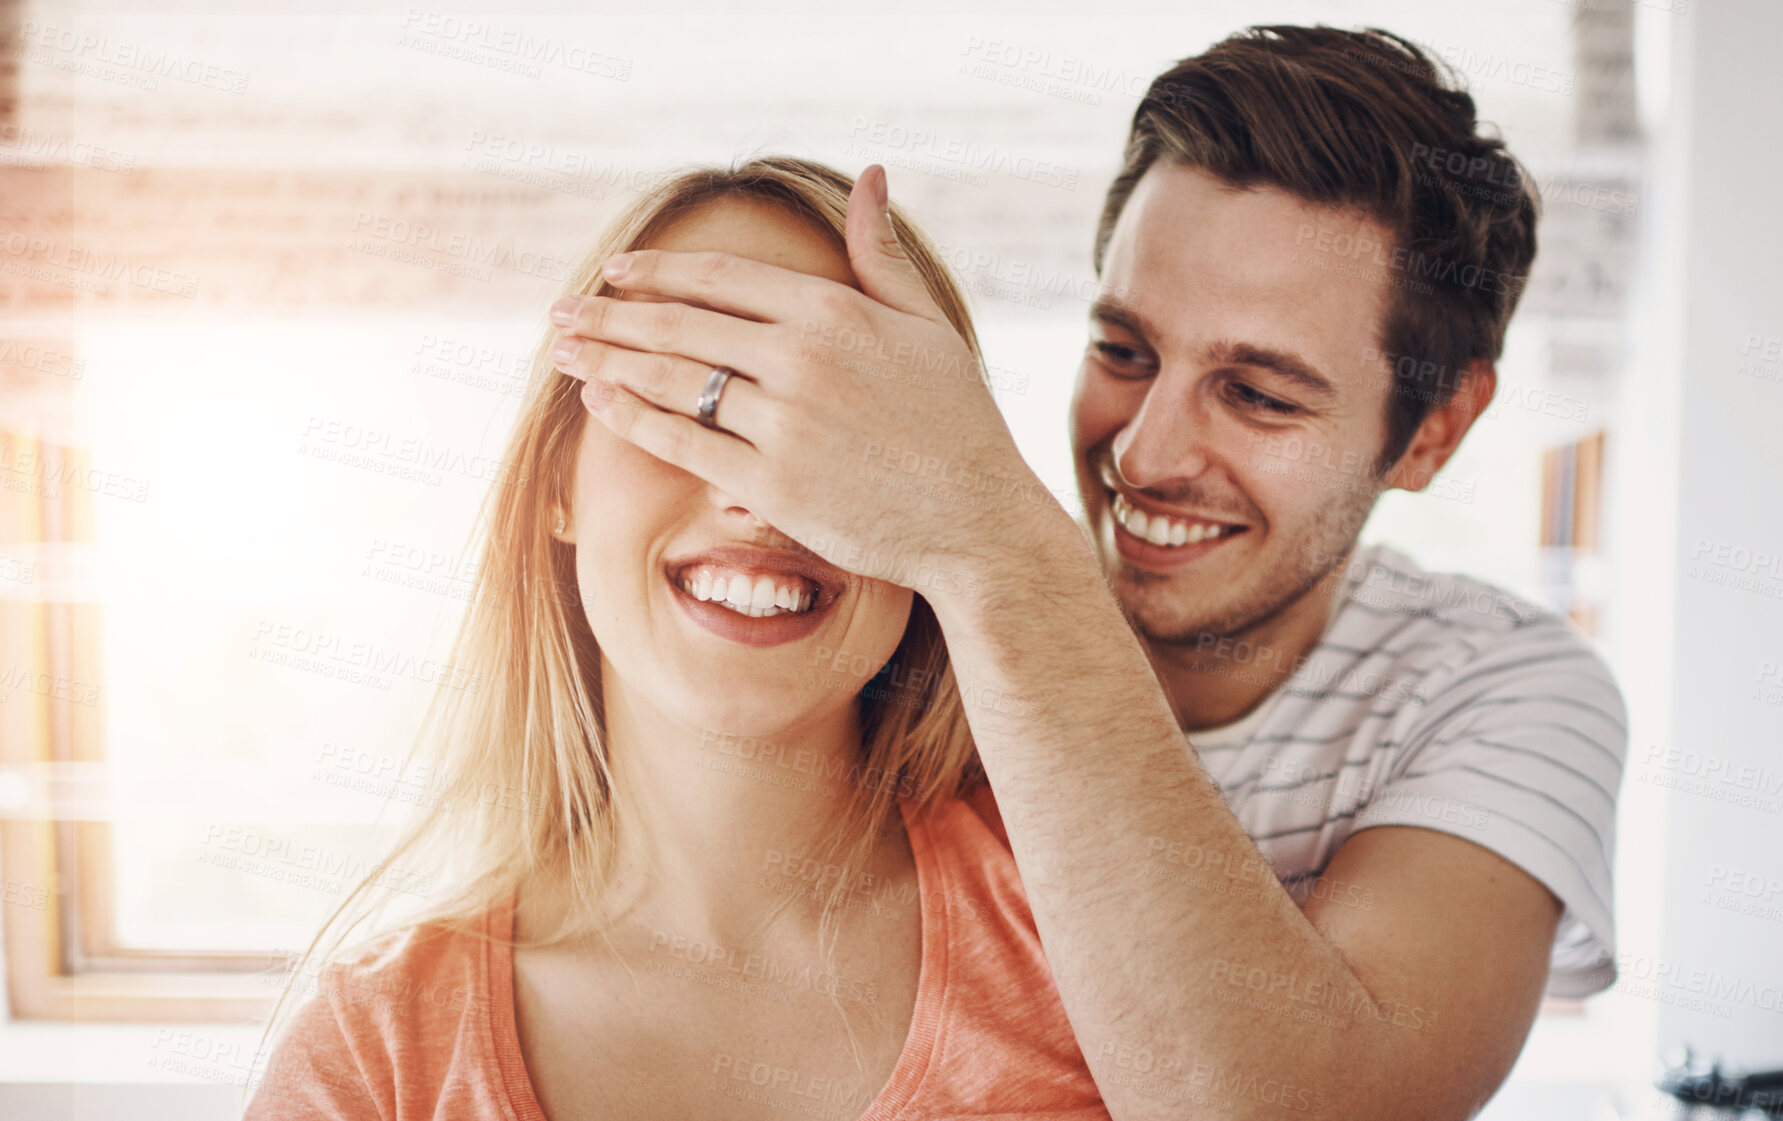 Buy stock photo Shot of a young man playfully covering his girlfriend’s eyes at home